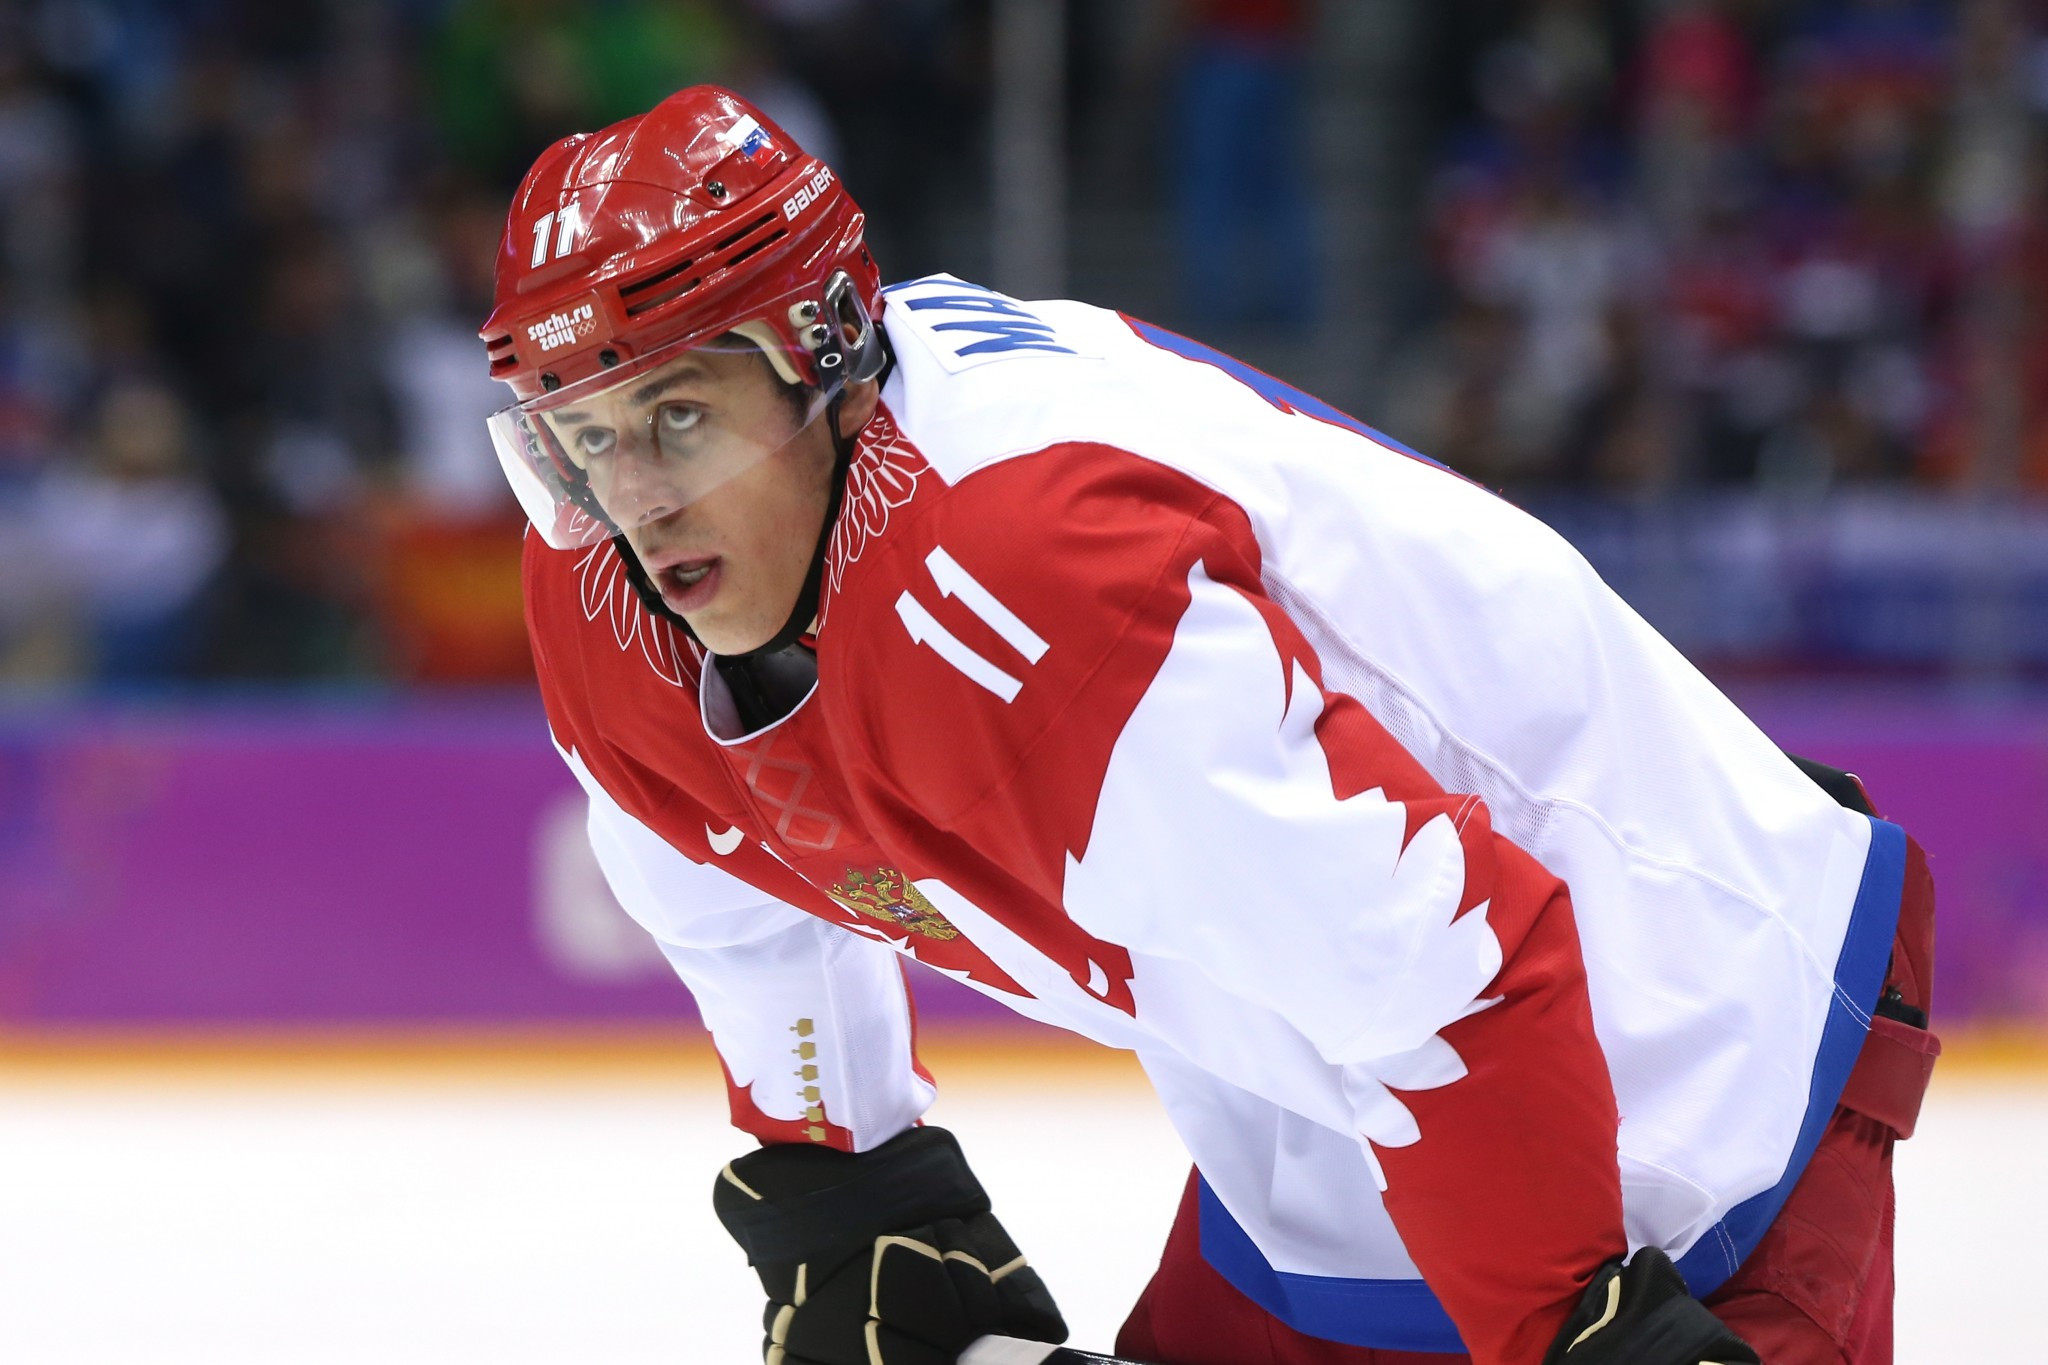 Evgeni Malkin represented Russia at the Sochi 2014 Olympics and still hopes to do so again at Pyeongchang 2018 ©Getty Images